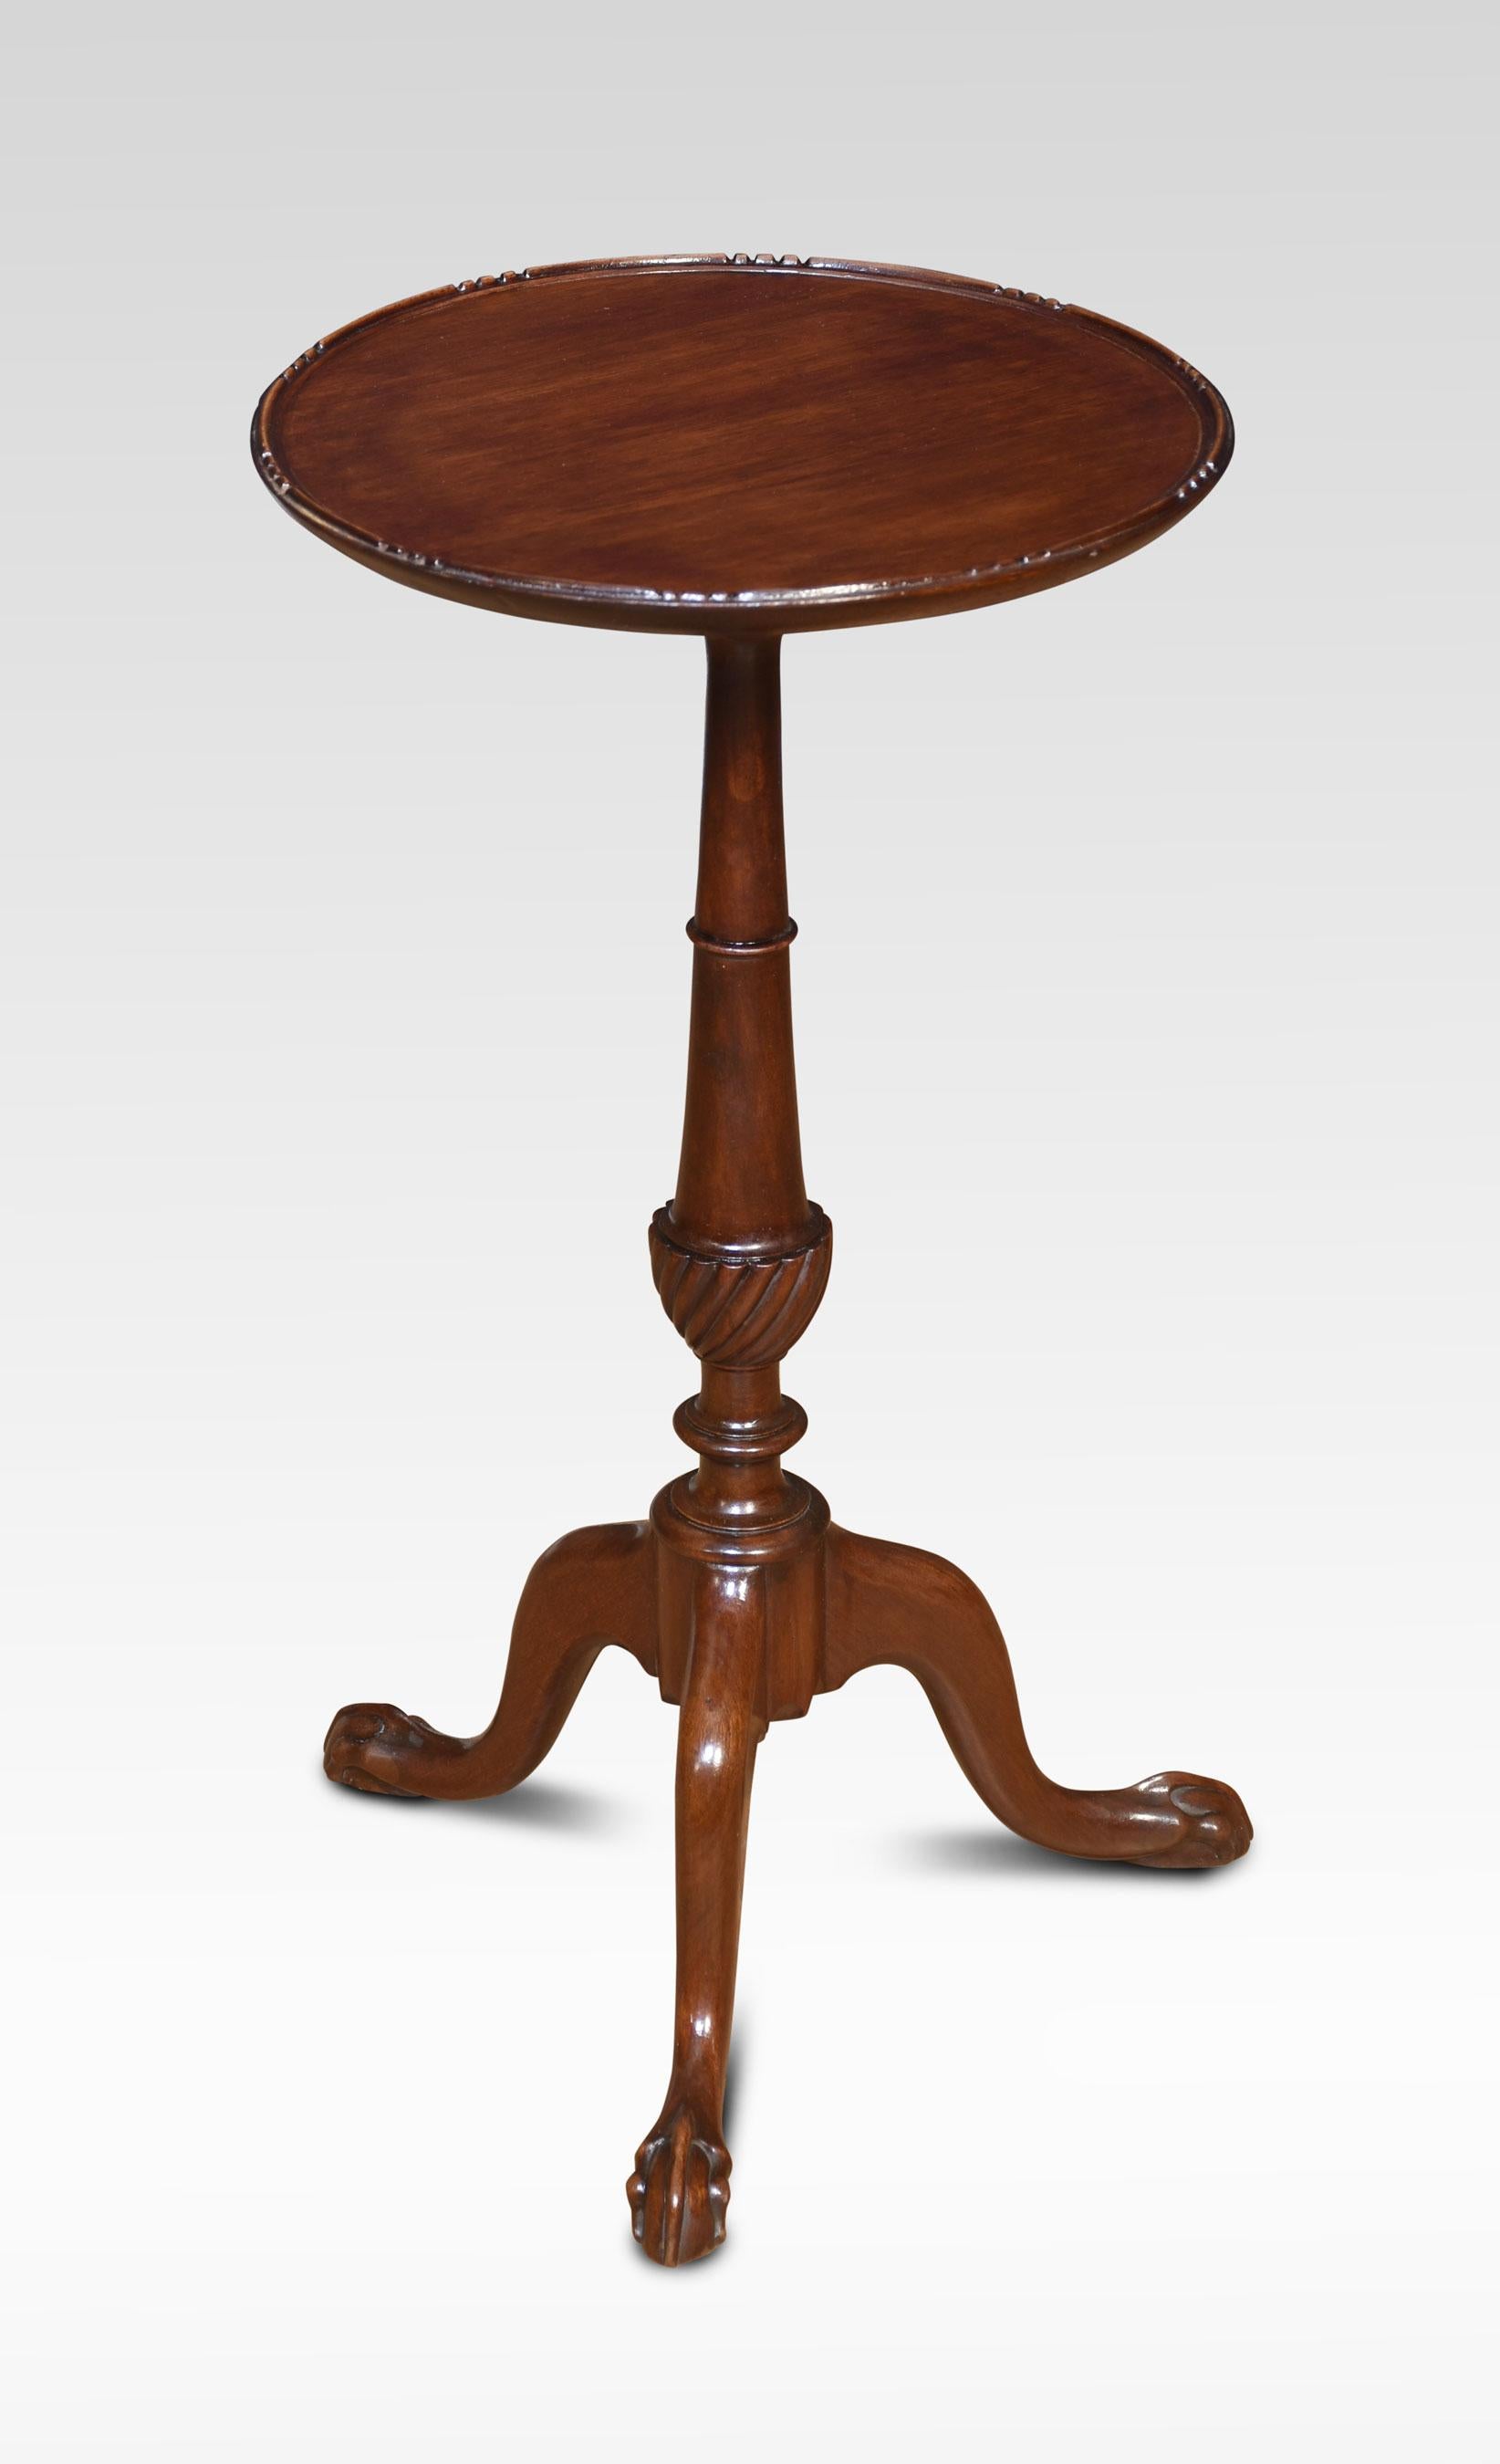 Pair of side tables the circular mahogany tops raised up on fluted stems on three downswept supports terminating in pad feet.
Dimensions
Height 21.5 Inches
Width 13 Inches
Depth 13 Inches.